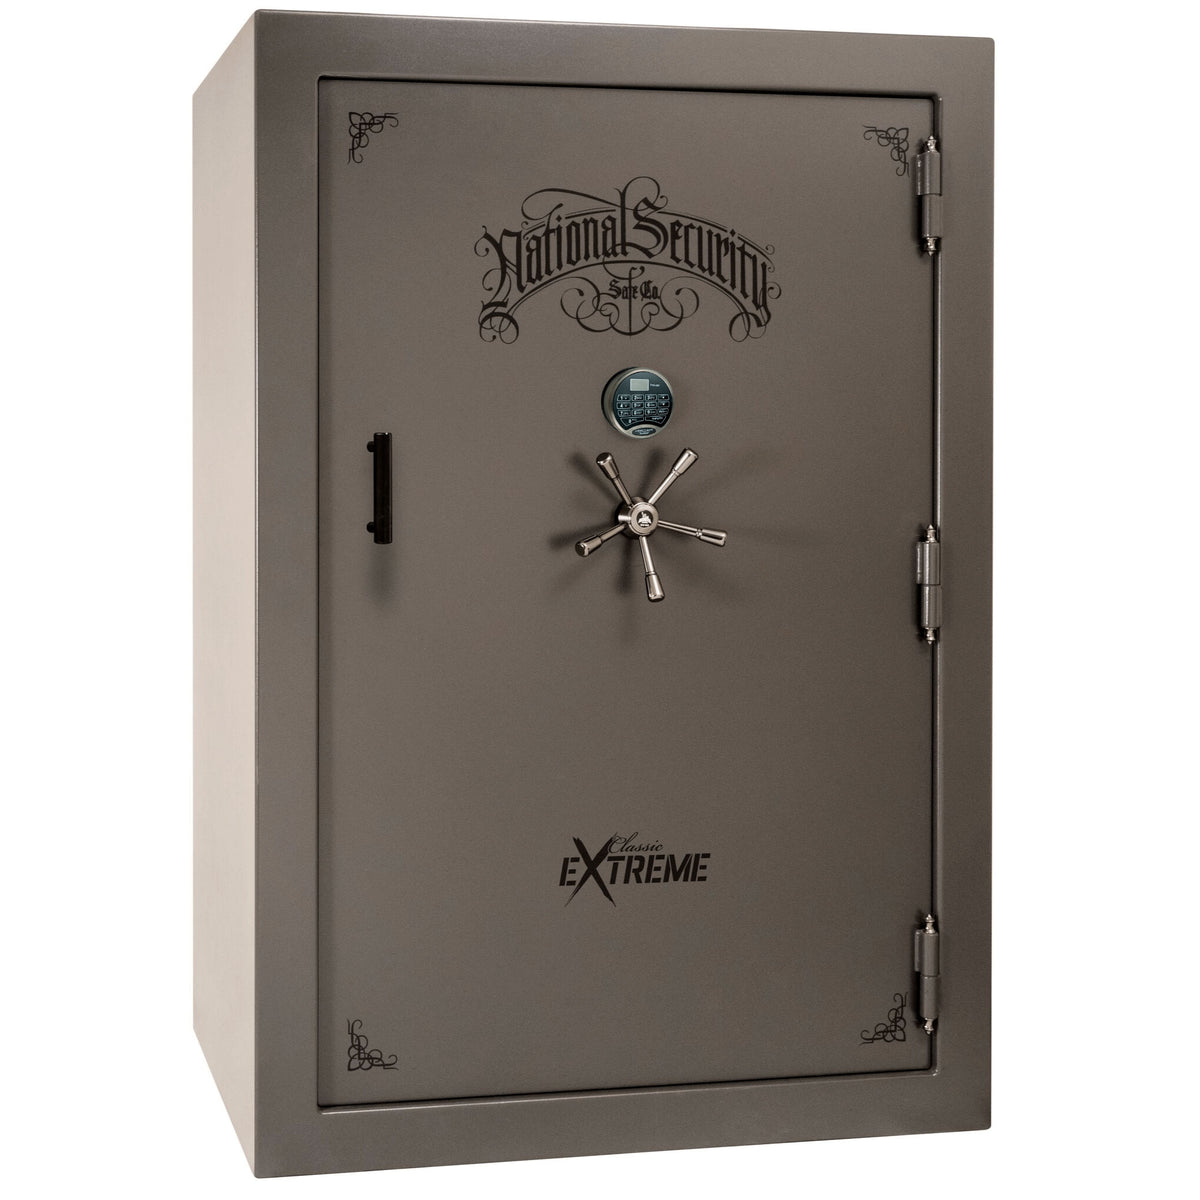 Liberty Classic Select Extreme Wide Body Safe in Gray Gloss with Black Chrome Electronic Lock.